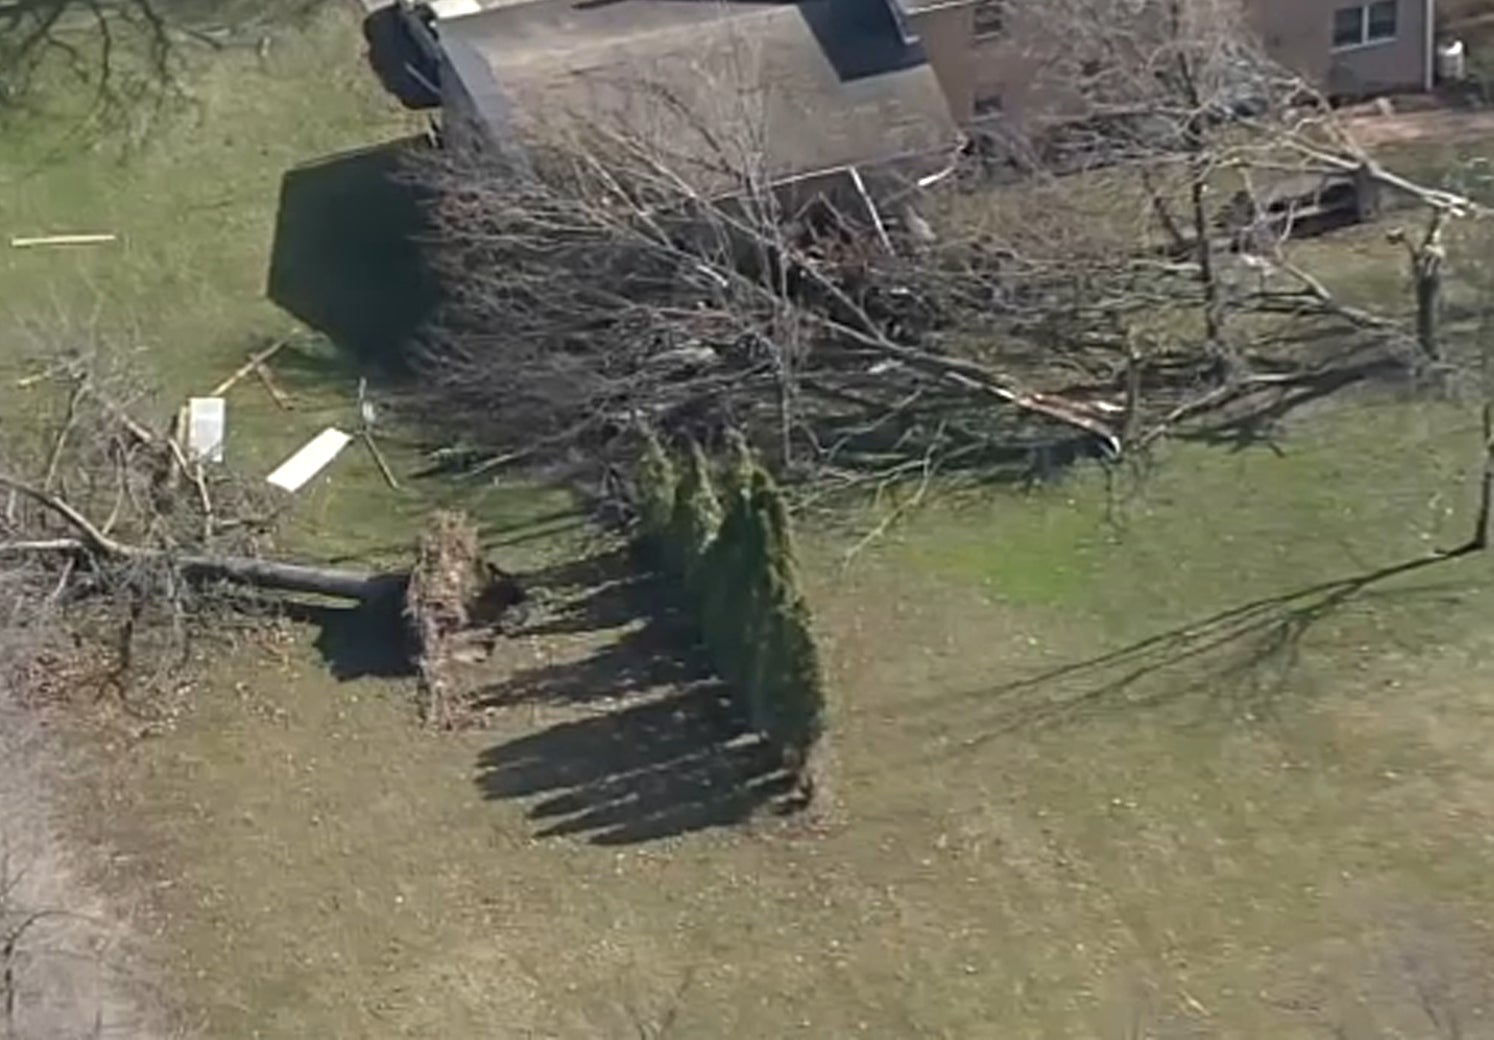 NWS confirms a tornado touched down in Bucks County WHYY